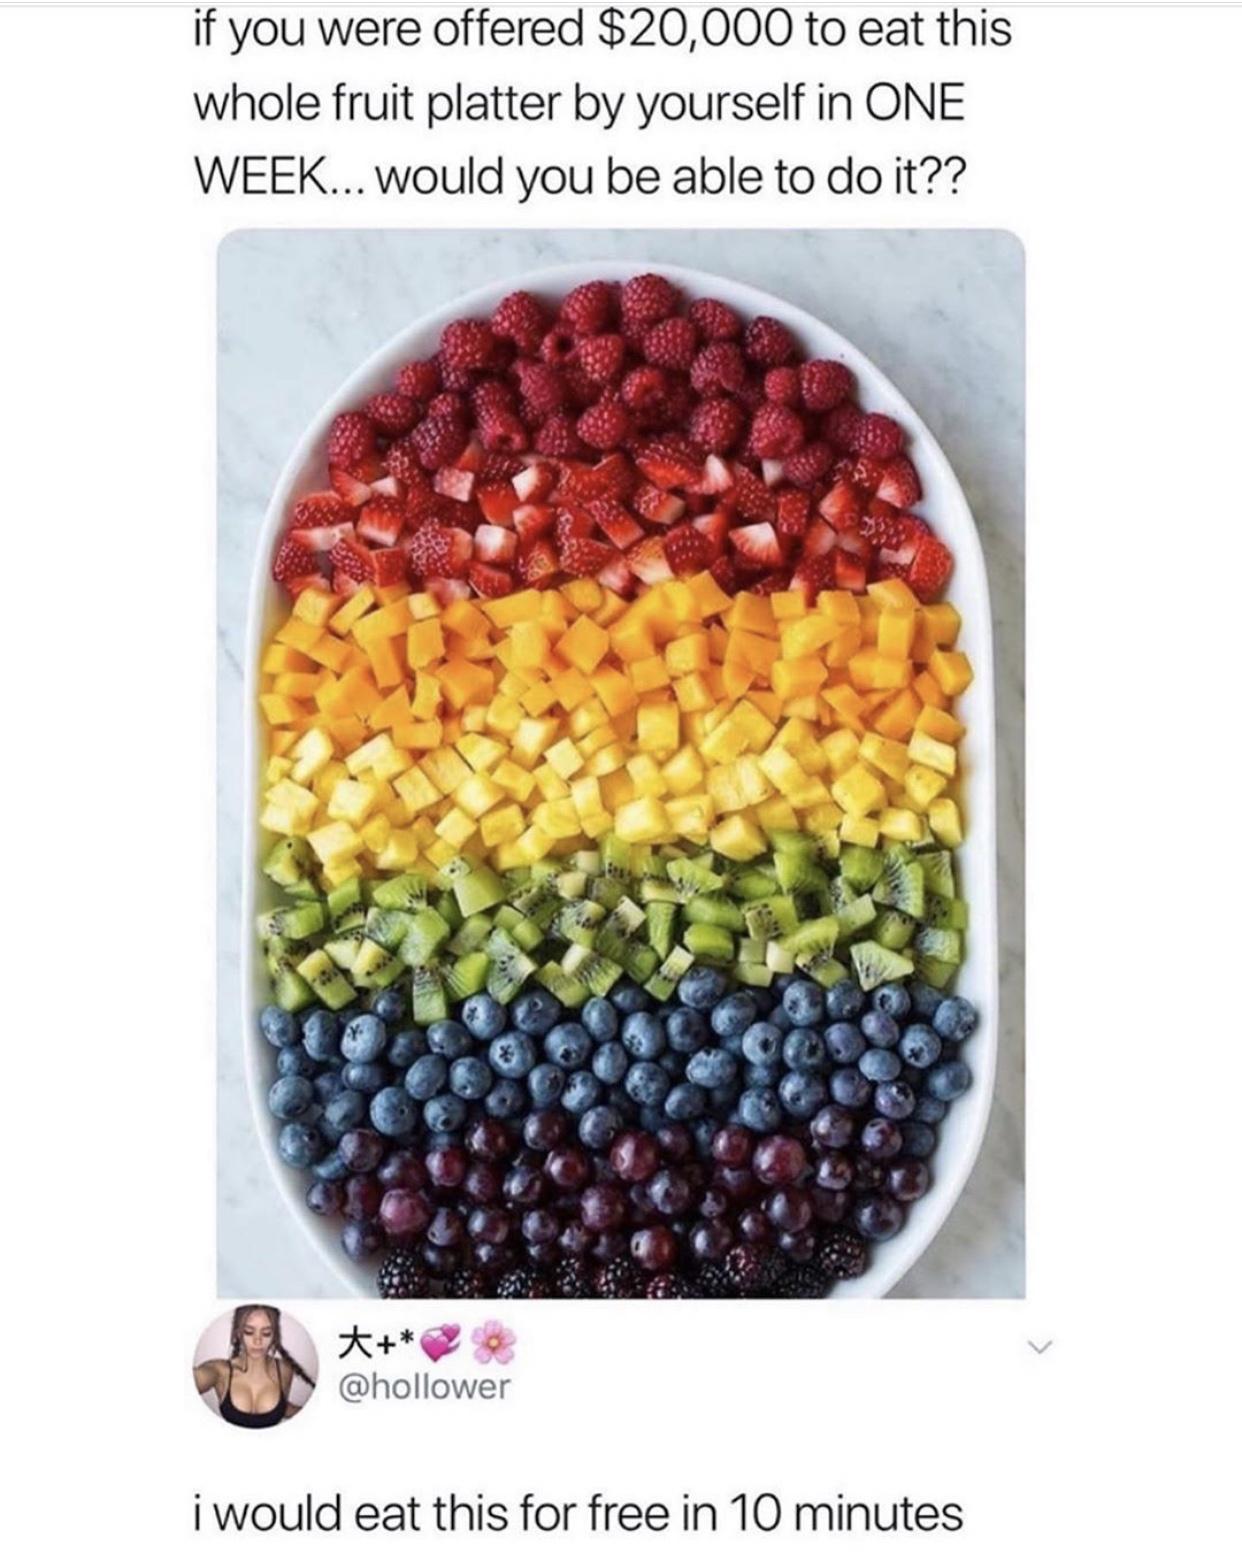 fruit platter rainbow - if you were offered $20,000 to eat this whole fruit platter by yourself in One Week... Would you be able to do it?? i would eat this for free in 10 minutes